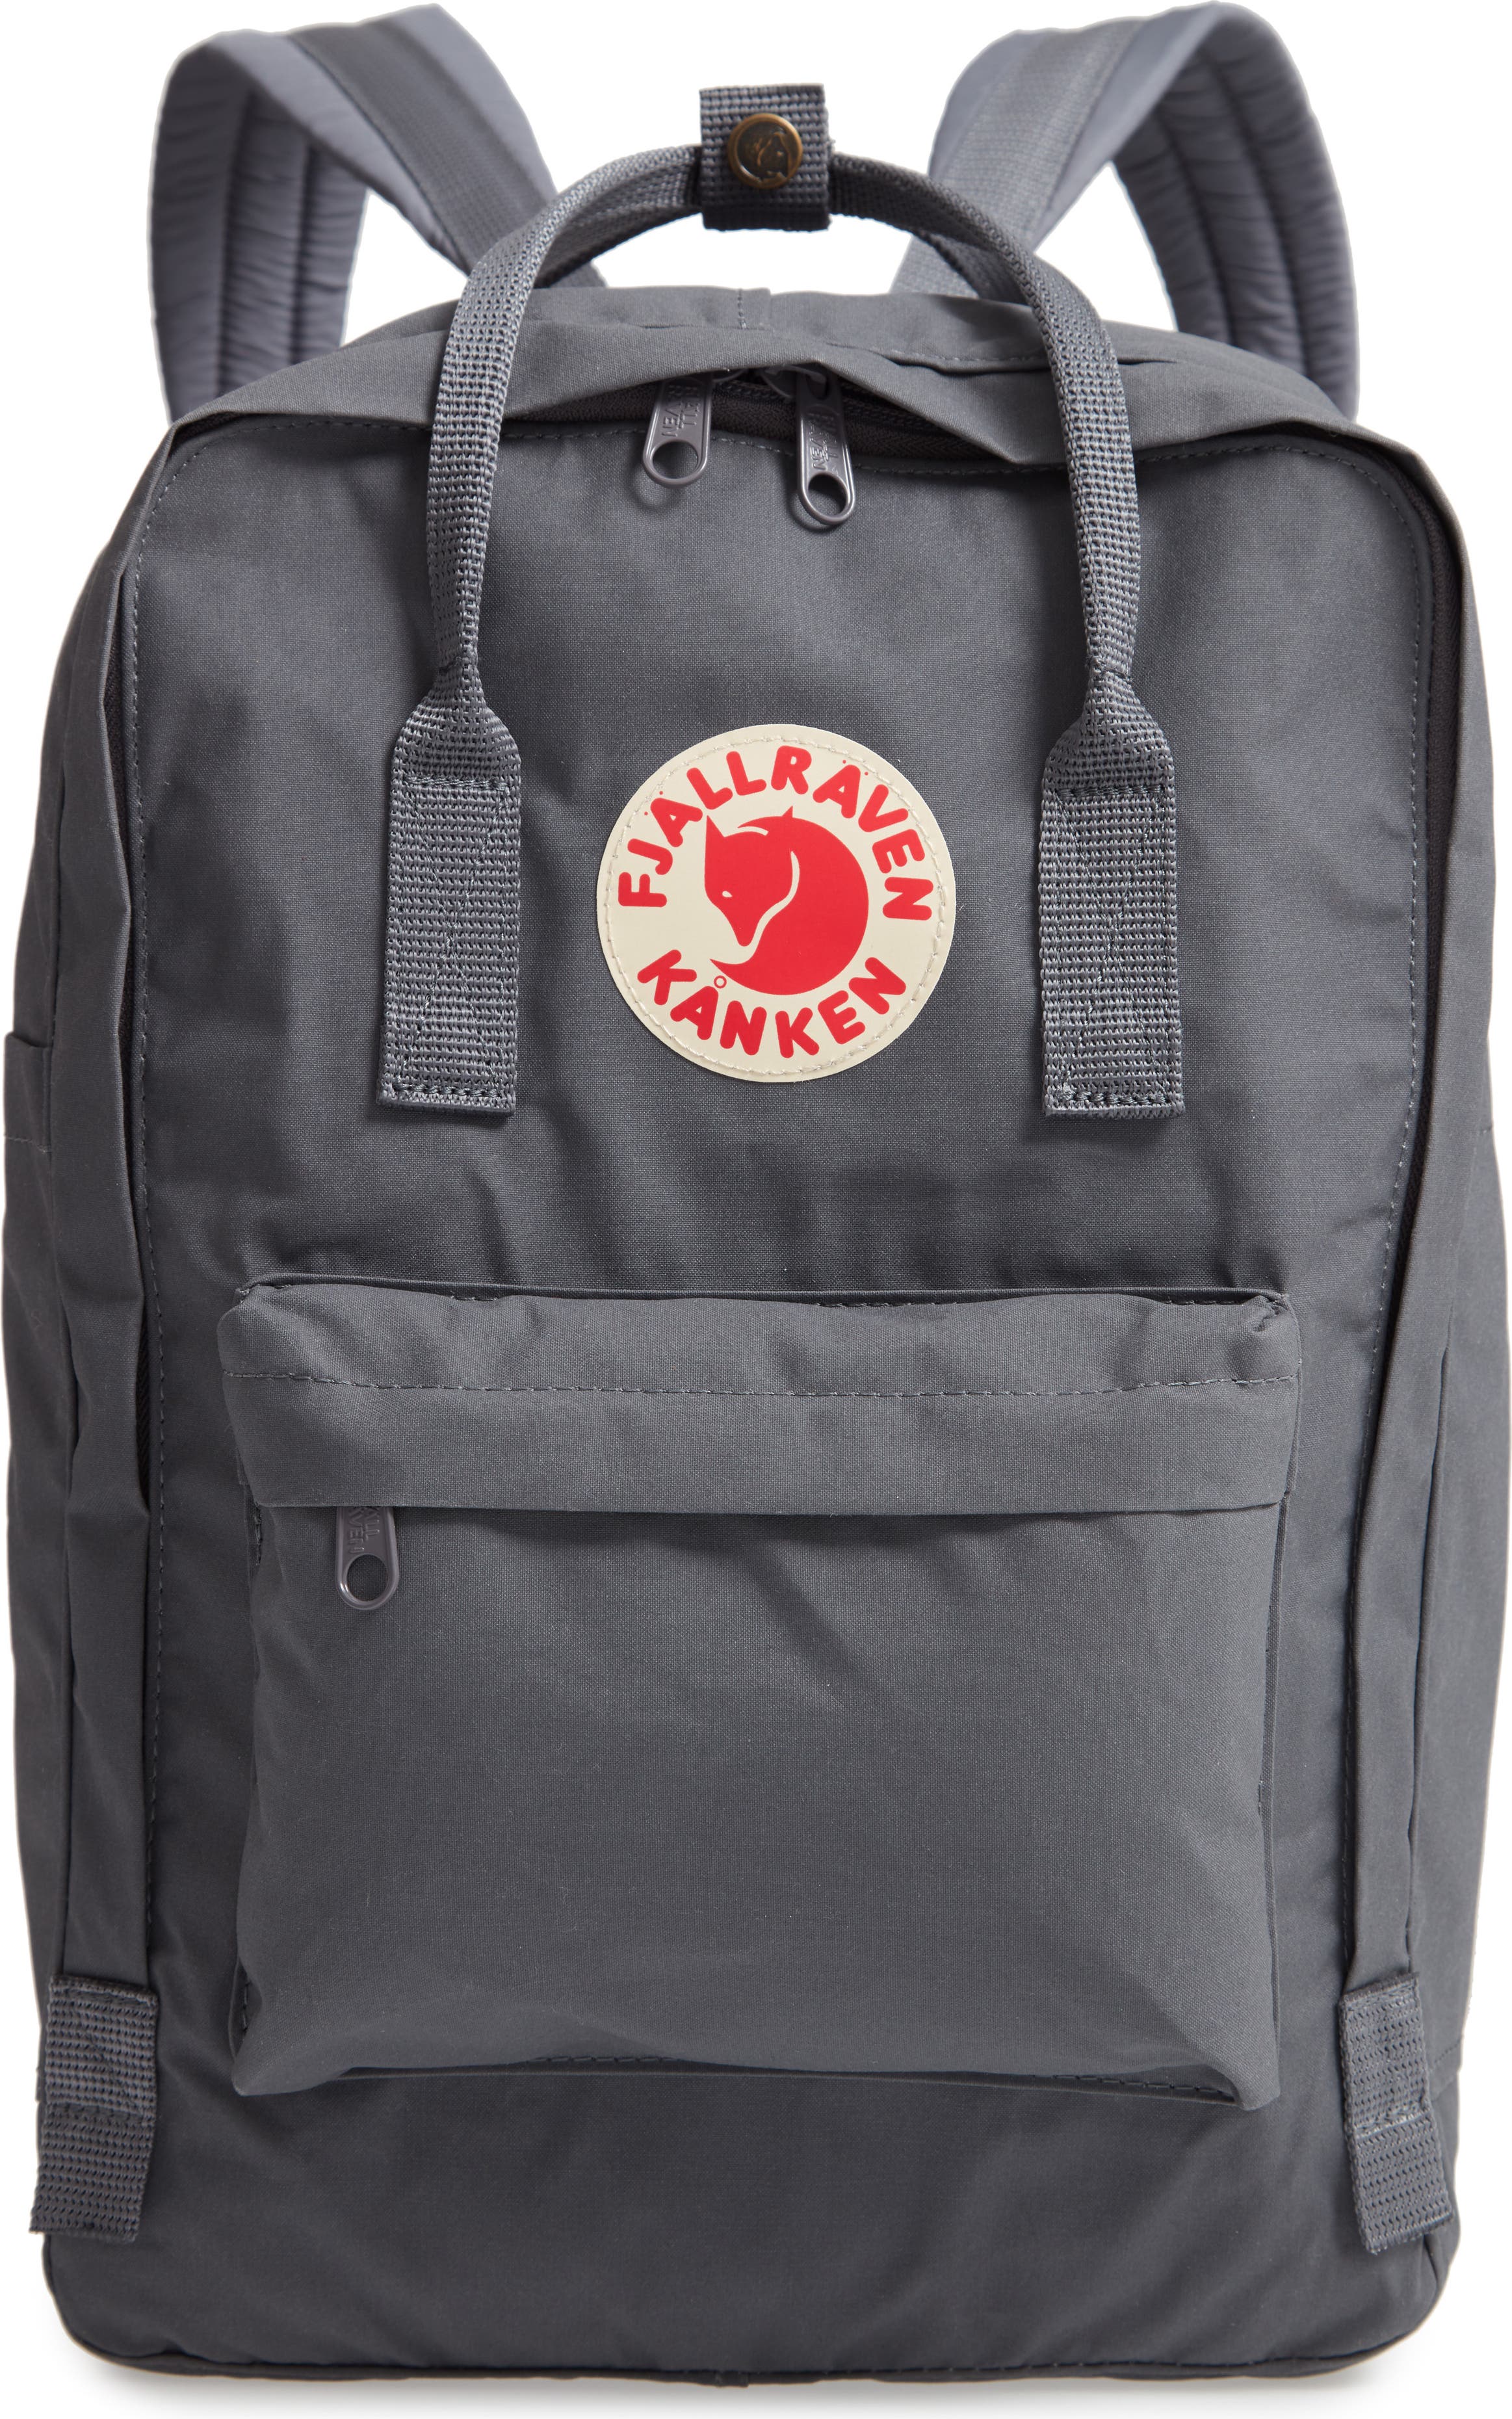 Backpack Not The Mama Laptop Backpack Fashion Theme School Backpack 